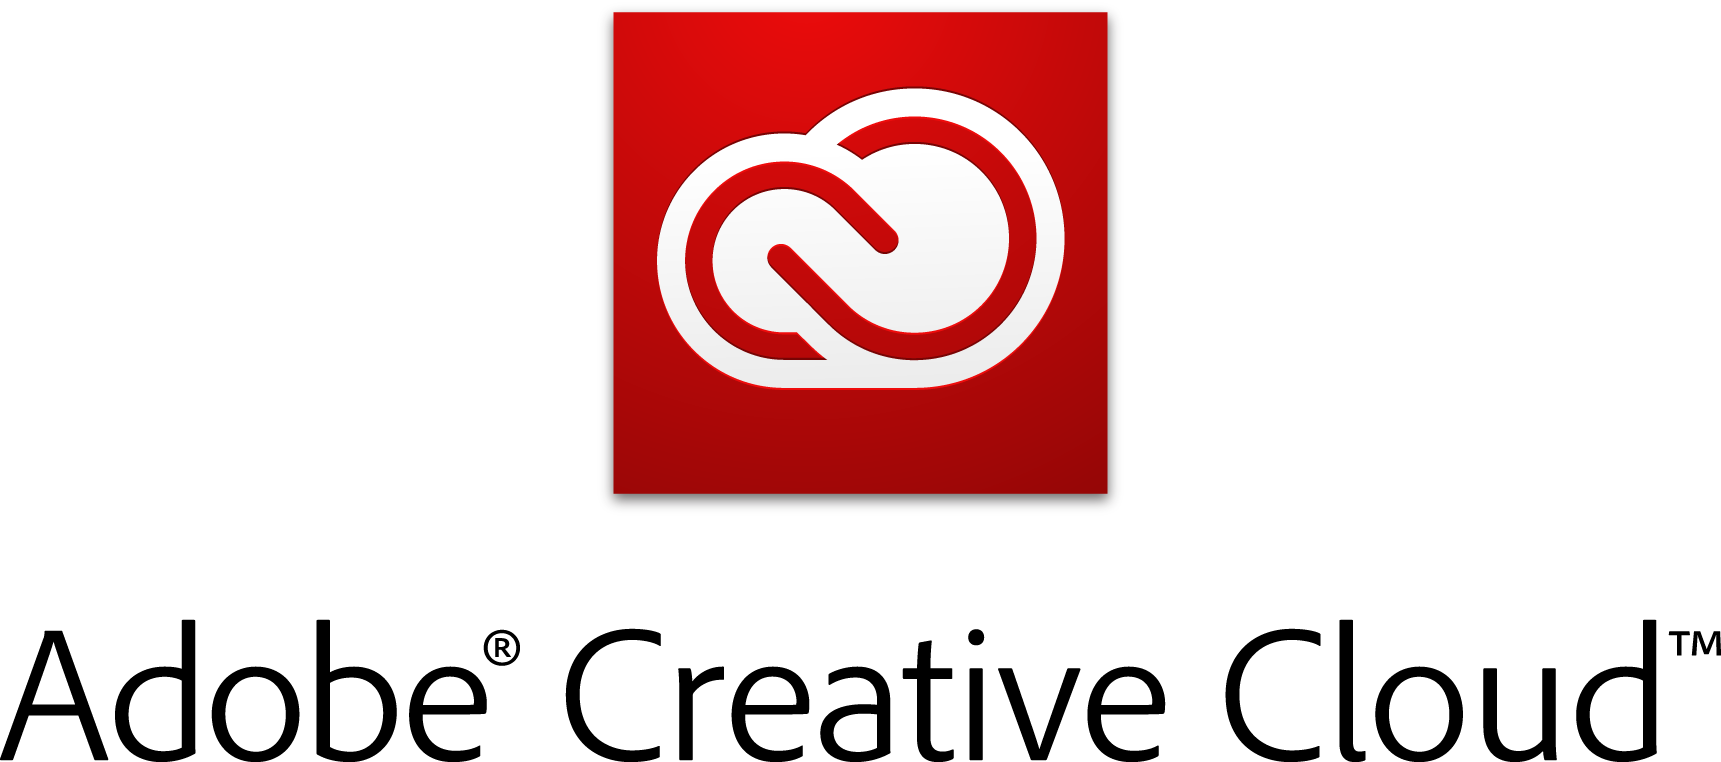 What is the Adobe Creative Cloud and how does it work? | Creative Studios